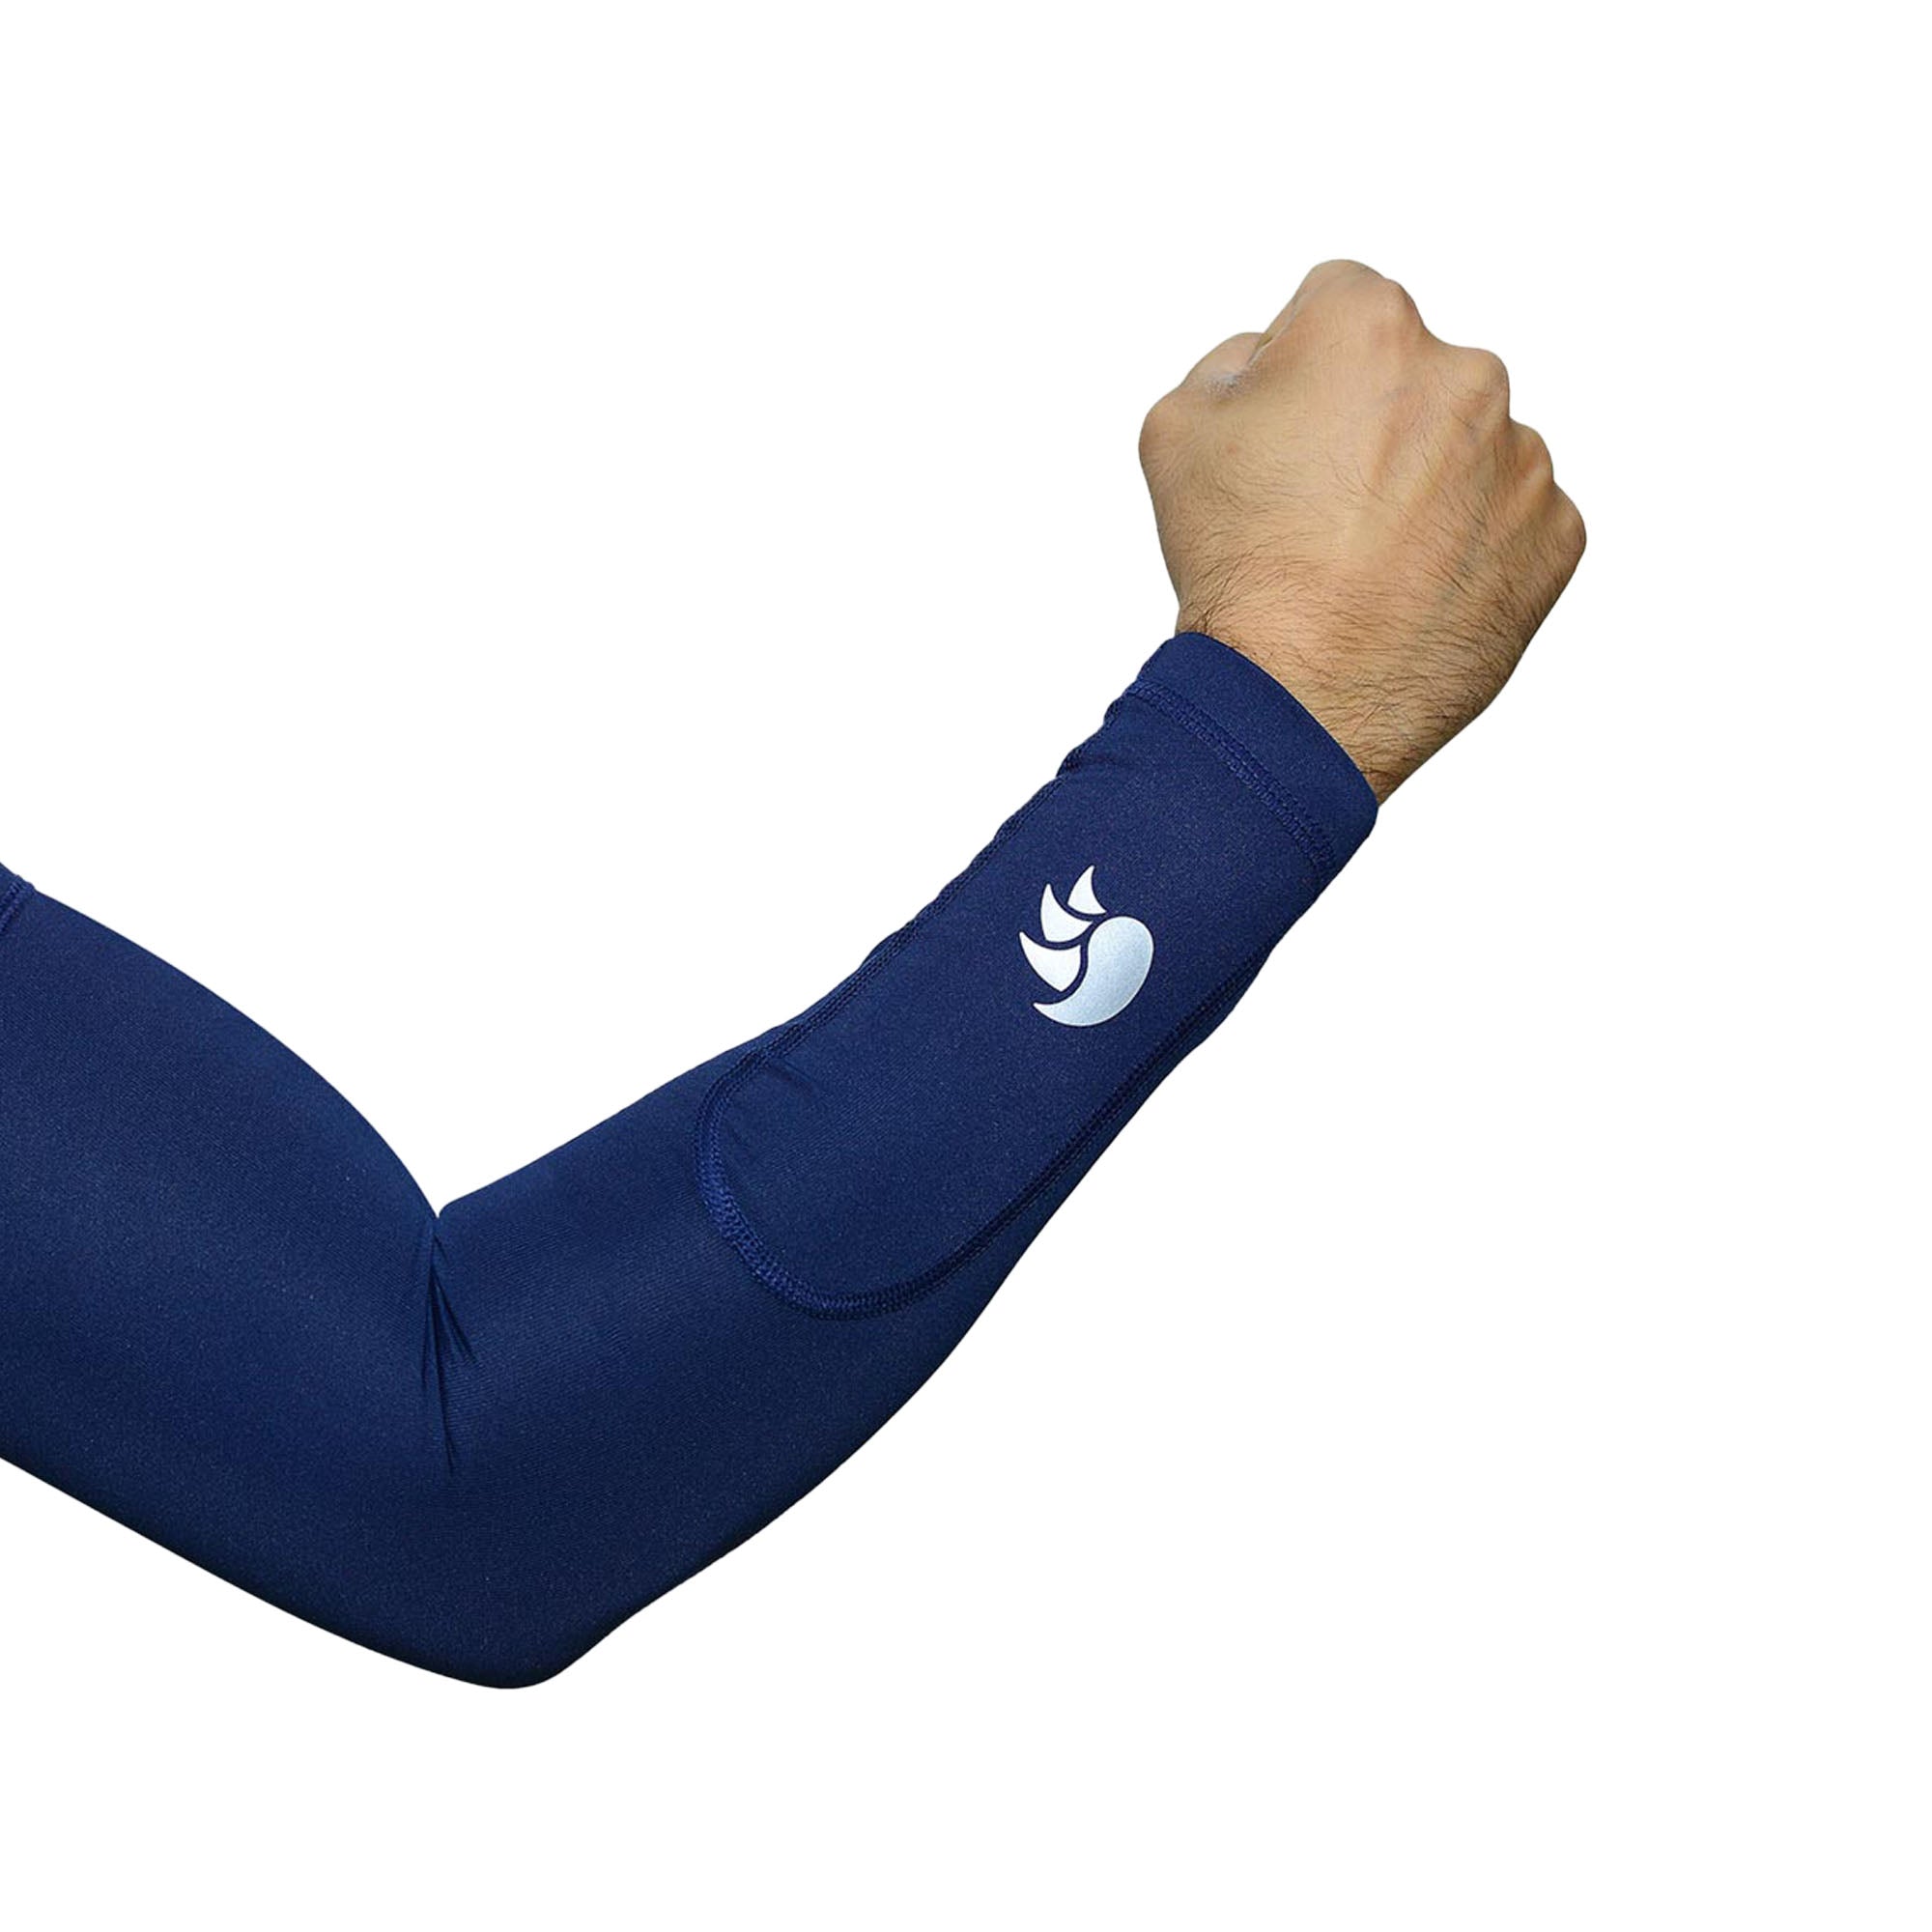 DSC NAVY ARM SLEEVES COMPRESSION